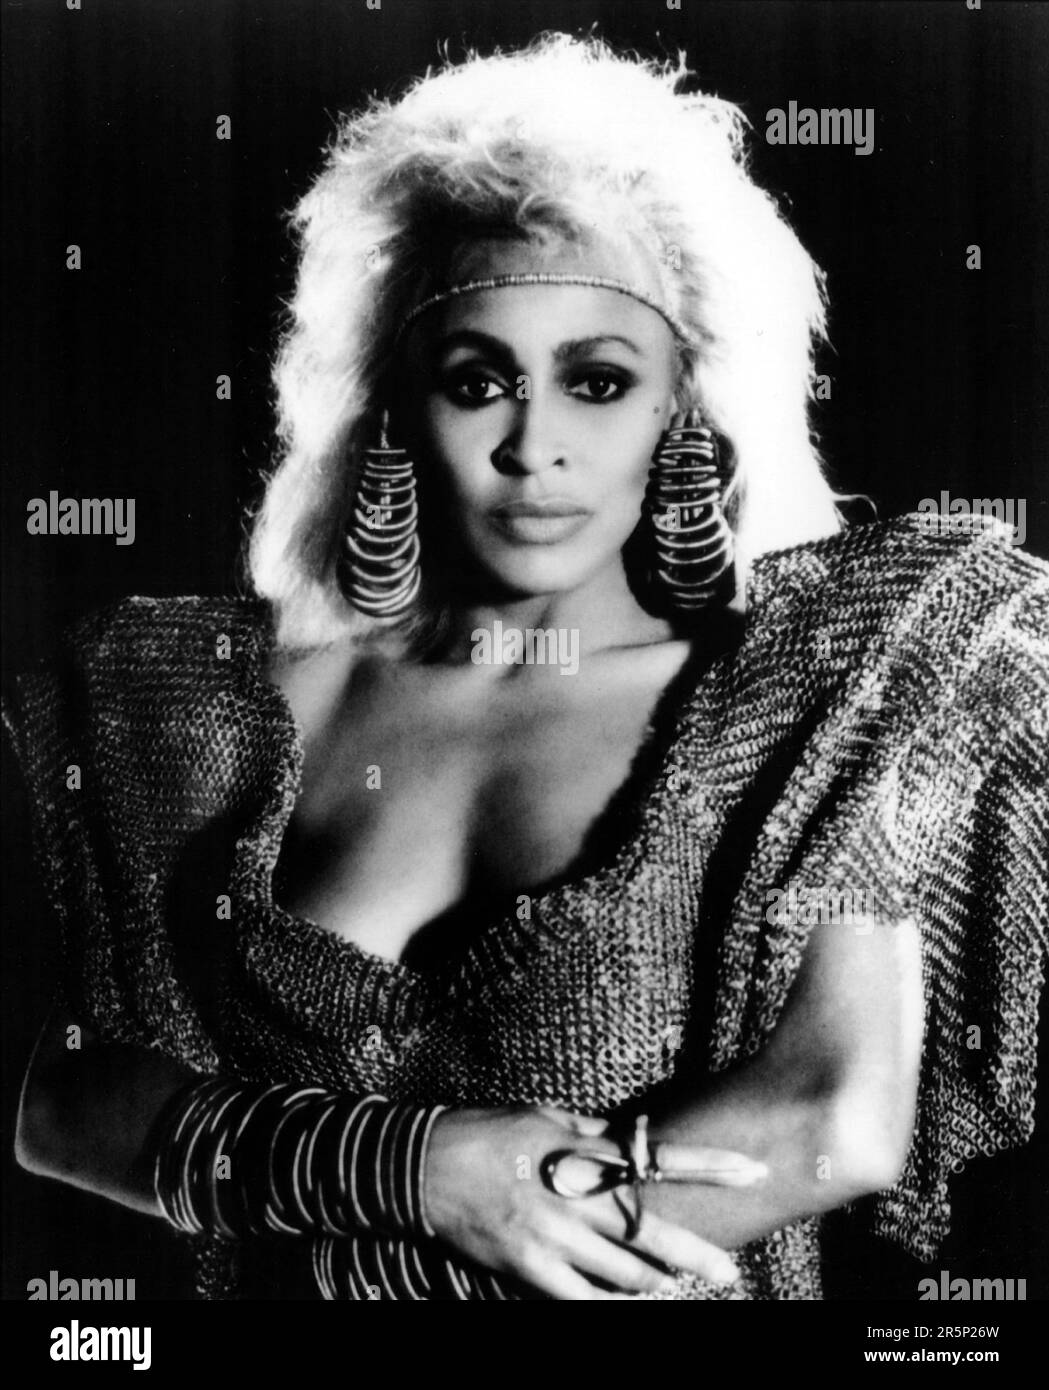 TINA TURNER in MAD MAX III: BEYOND THUNDERDOME (1985), directed by GEORGE MILLER. Credit: WARNER BROTHERS / Album Stock Photo